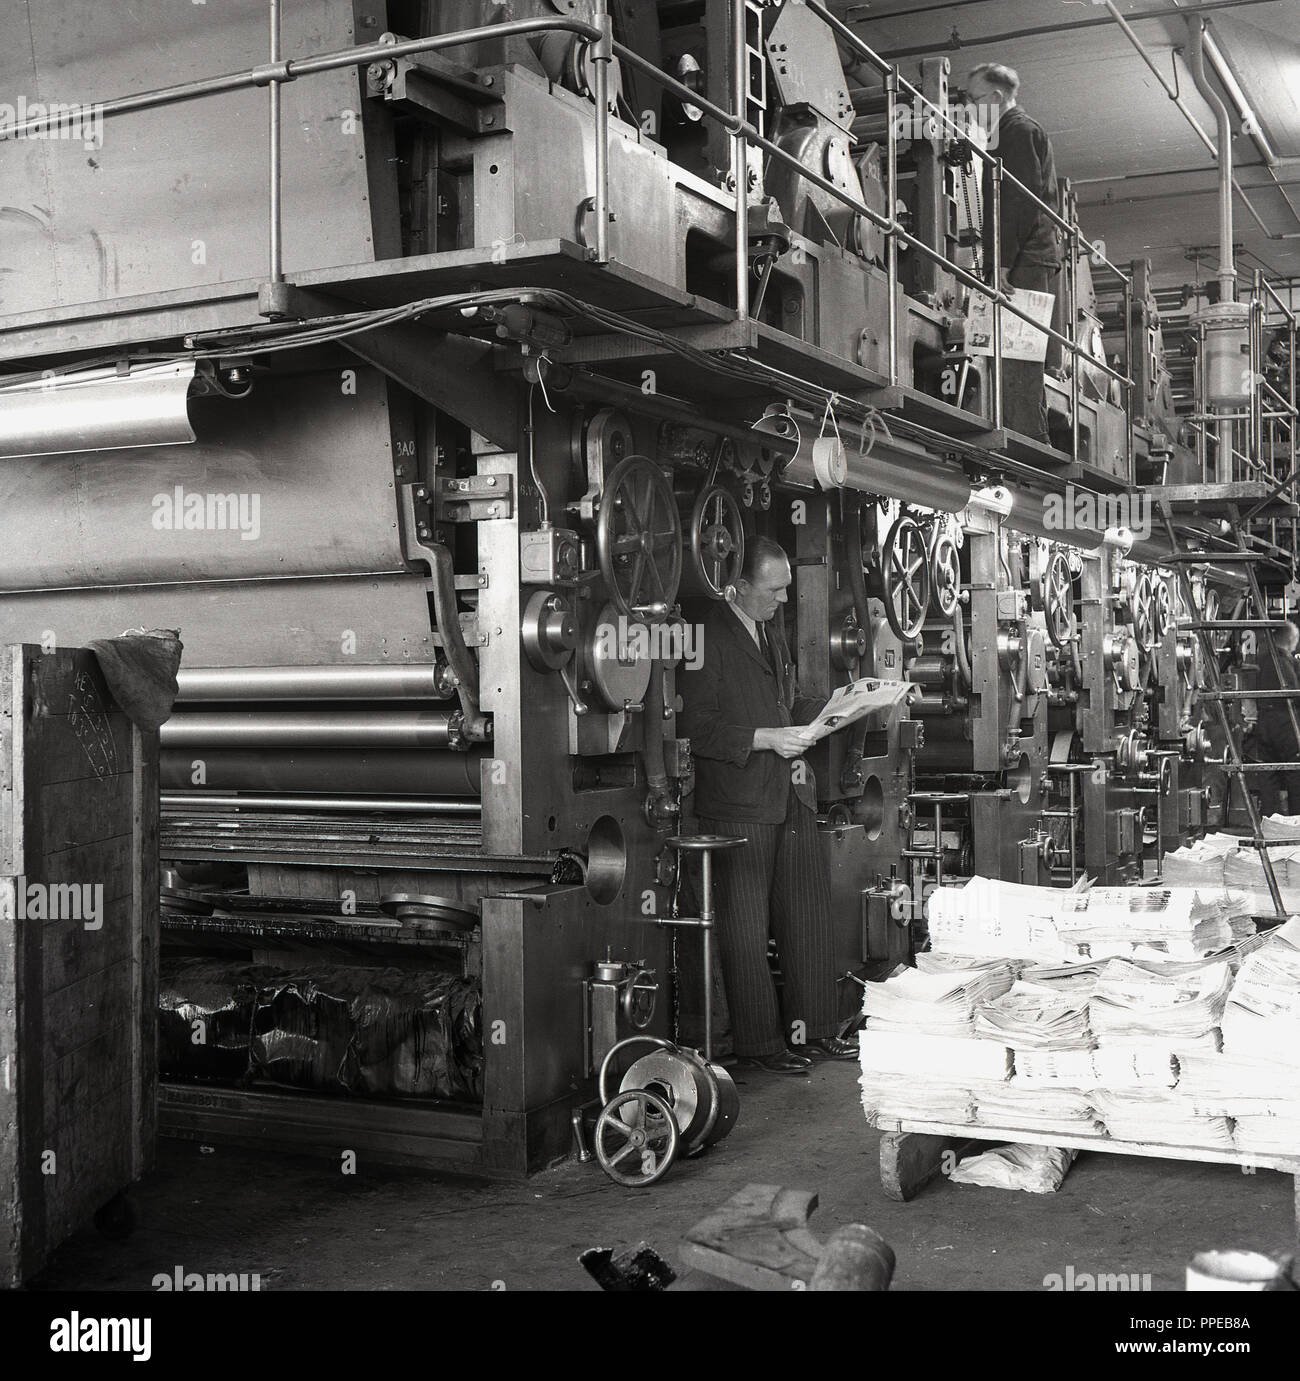 1950s, a suited manager stands underneath the giant printing presses with an operator above, while checking the magazines that have been printed at HWV printers, Aylesbury, Bucks, England, UK. In 1963 the company would become the Britihs Printing Corporation one of the largest printing businesses in Britain, later taken over by Robert Maxwell. Stock Photo